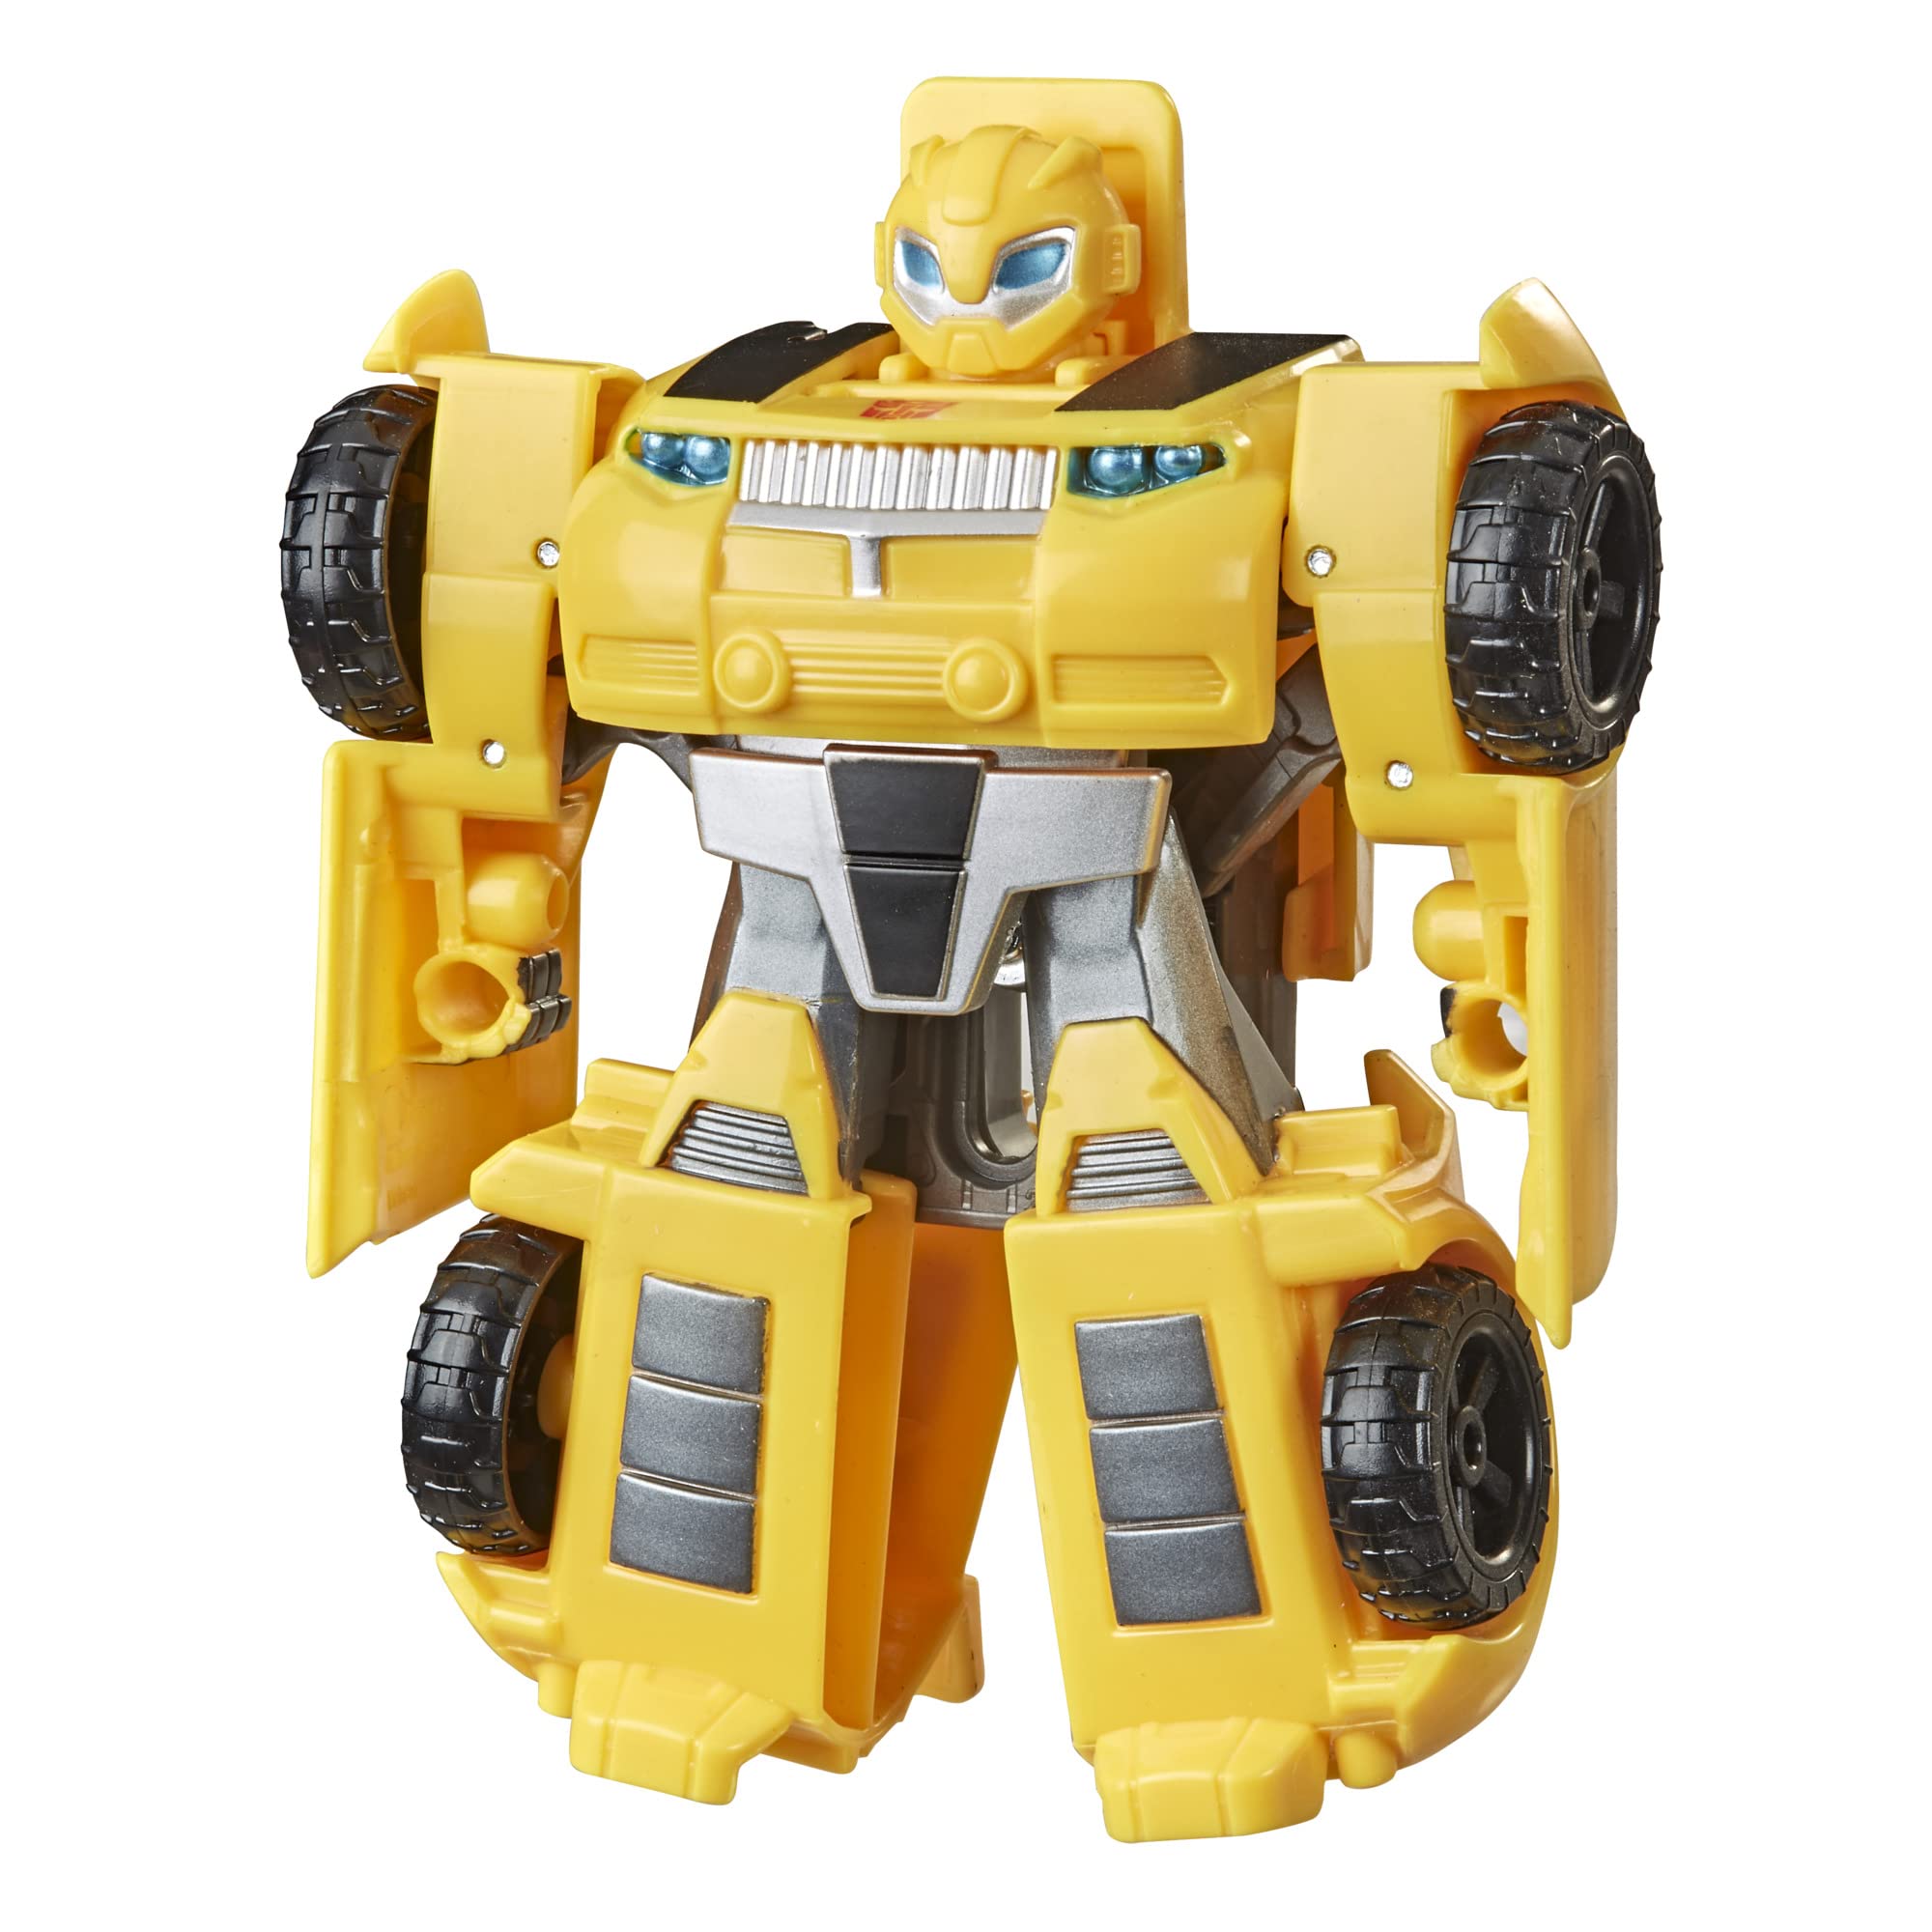 Transformers Playskool Heroes Rescue Bots Academy Classic Team Bumblebee Converting Toy